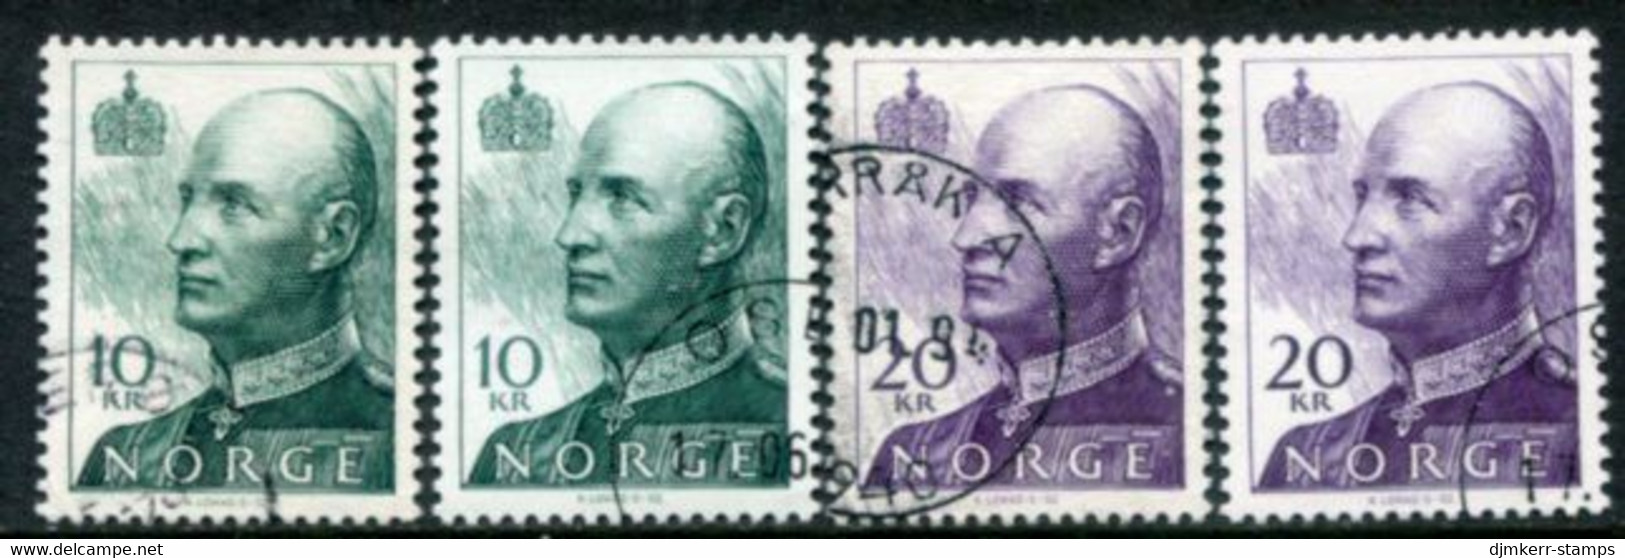 NORWAY 1993) Definitive: King Harald V 10 Kr. 20 Kr. On Ordinary And Phosphor Papers Used.   Michel 1131-32x,y - Usati